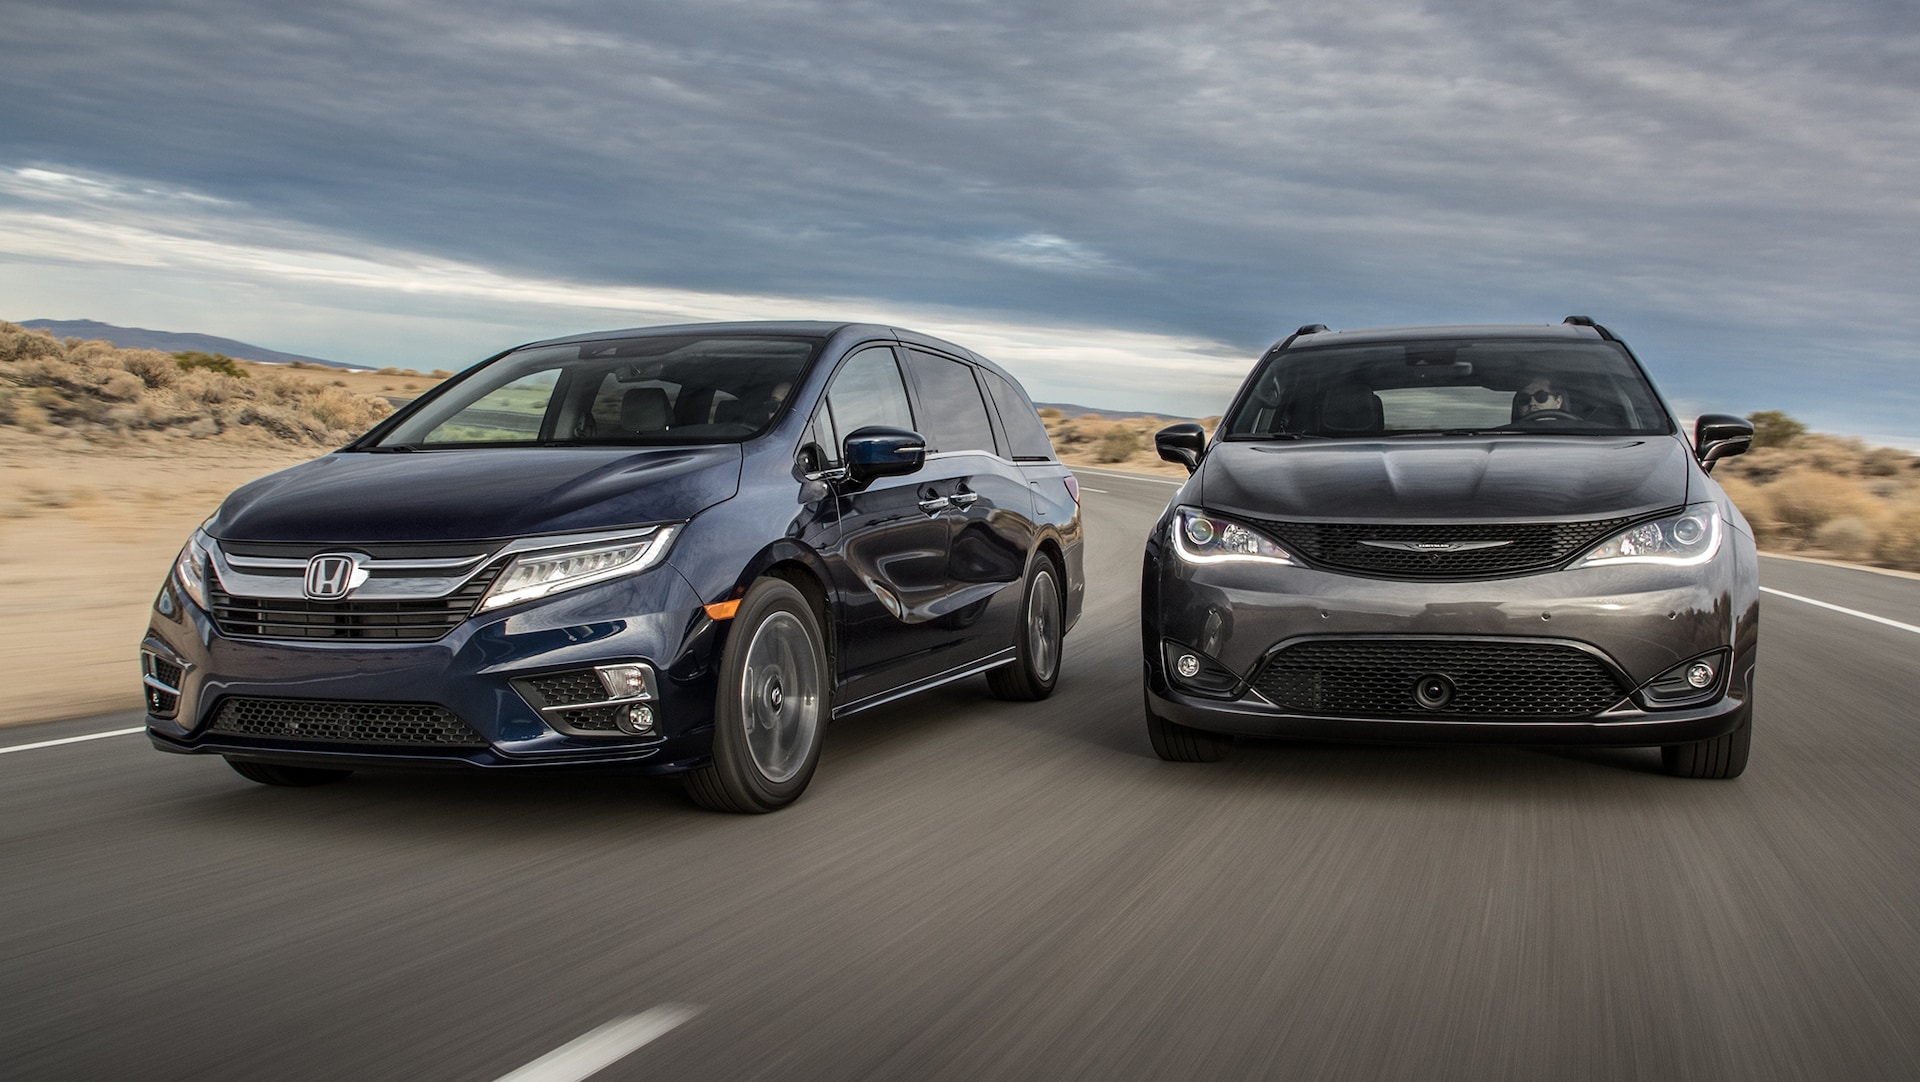 Chrysler Pacifica vs Honda Odyssey Which Minivan is the Best for Your Family? Electric Vehicle